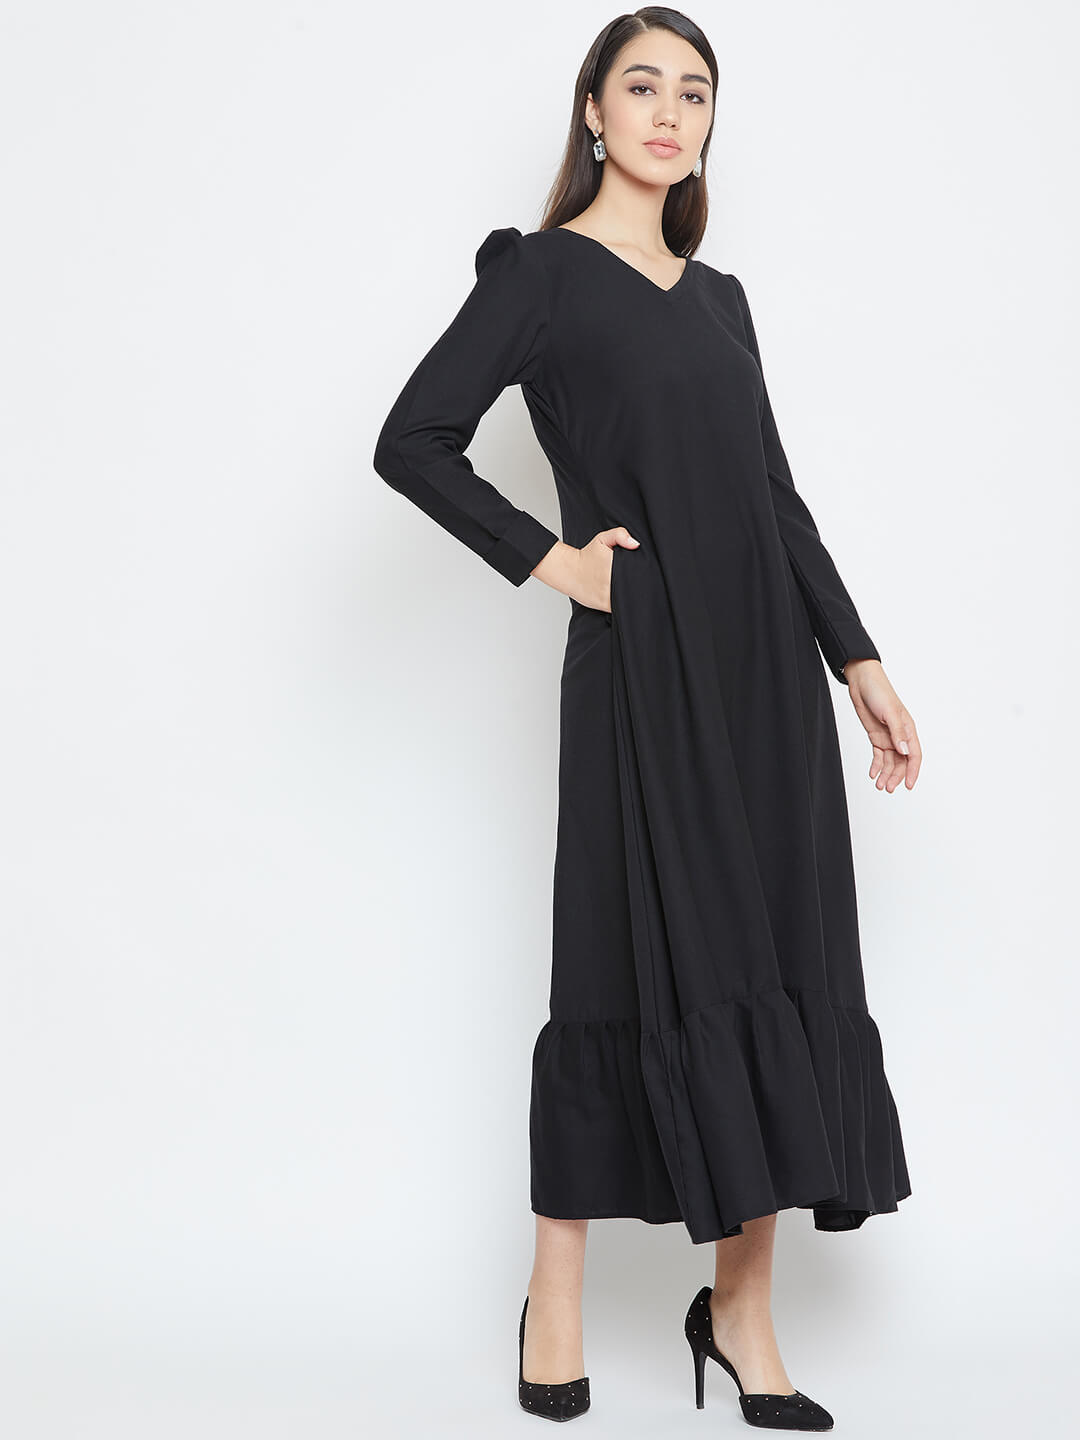 Black maxi dress for this winter shop them from thesvaya